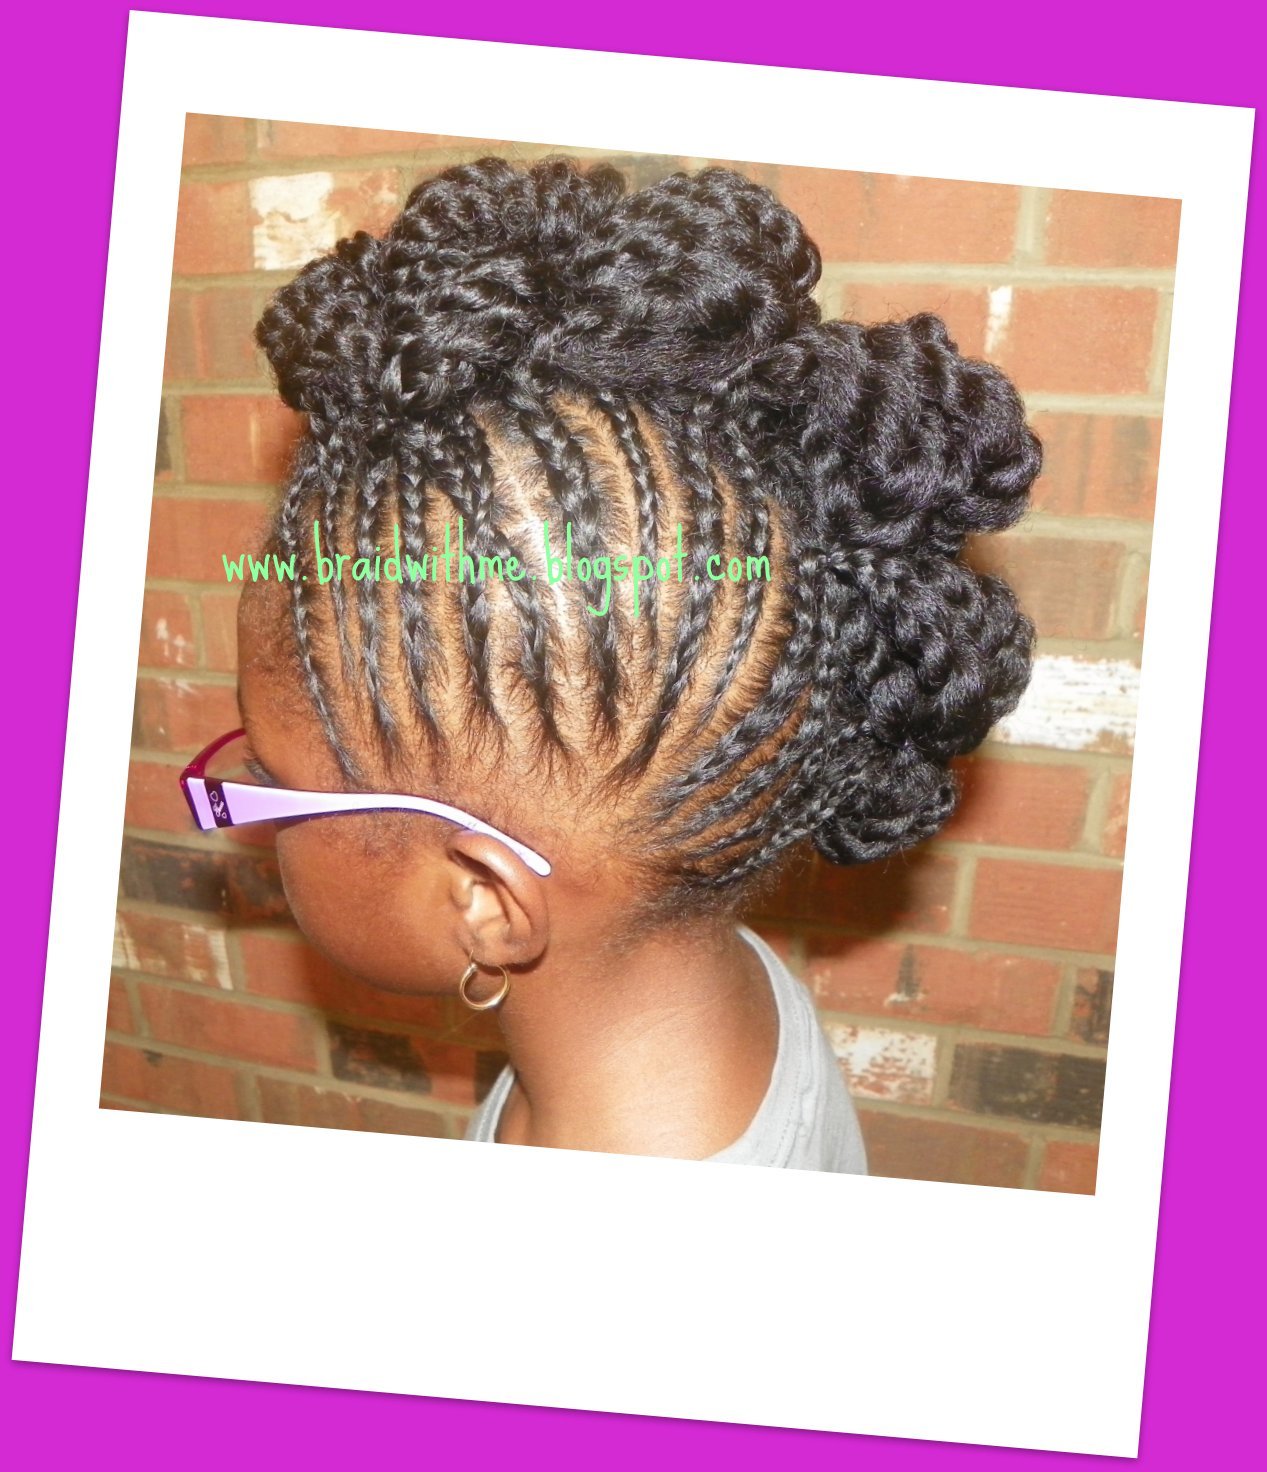 Beads, Braids and Beyond: Braided, Twisted & Rolled + Introducing New Blog:  Braid with Me